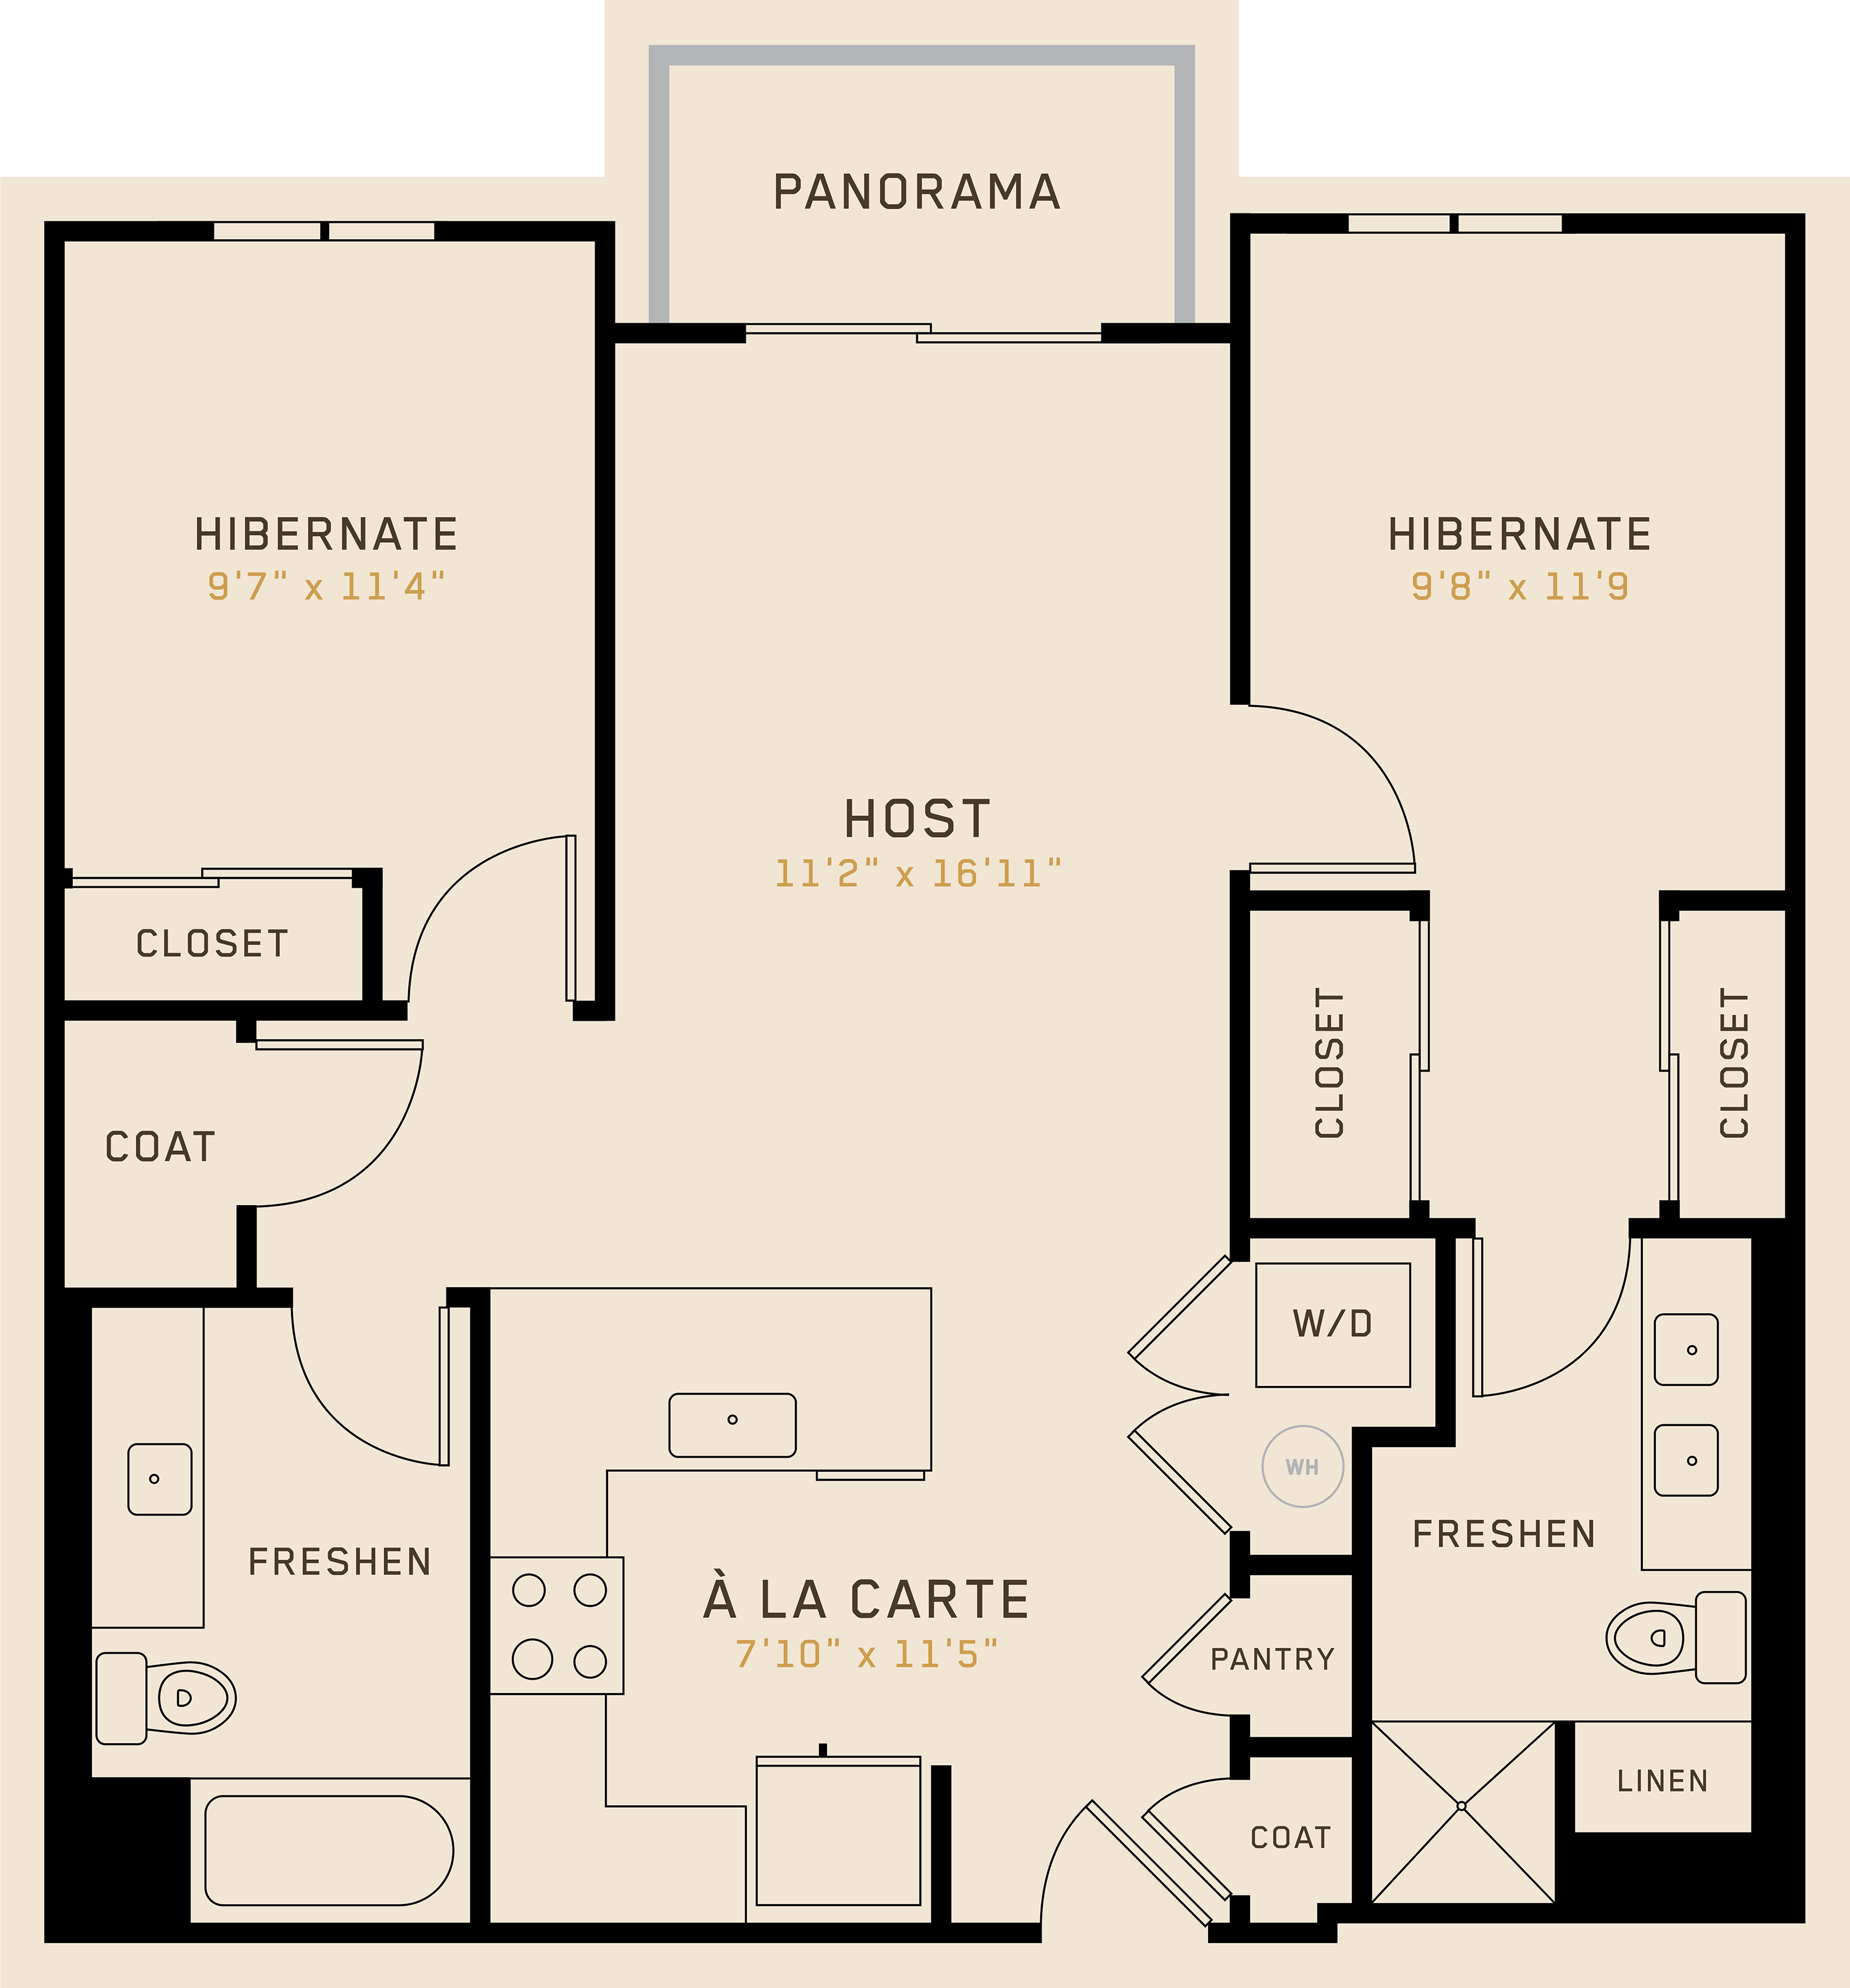 B2D floor plan featuring 2 bedrooms, 2 bathrooms, and is 976 square feet